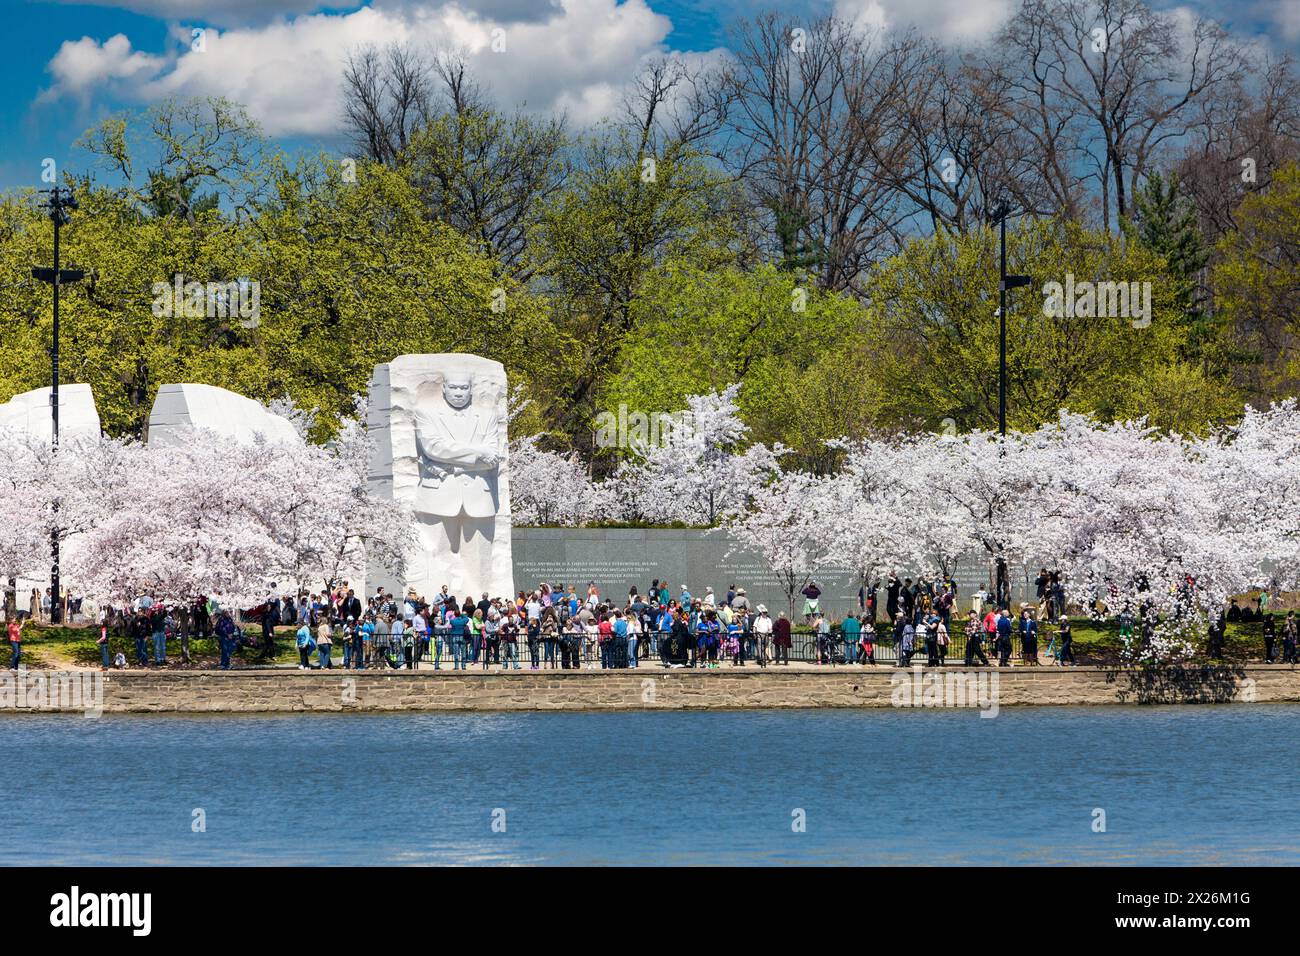 Washington, D.C., Cherry Blossoms and Martin Luther King, Jr. Memorial. Stock Photo